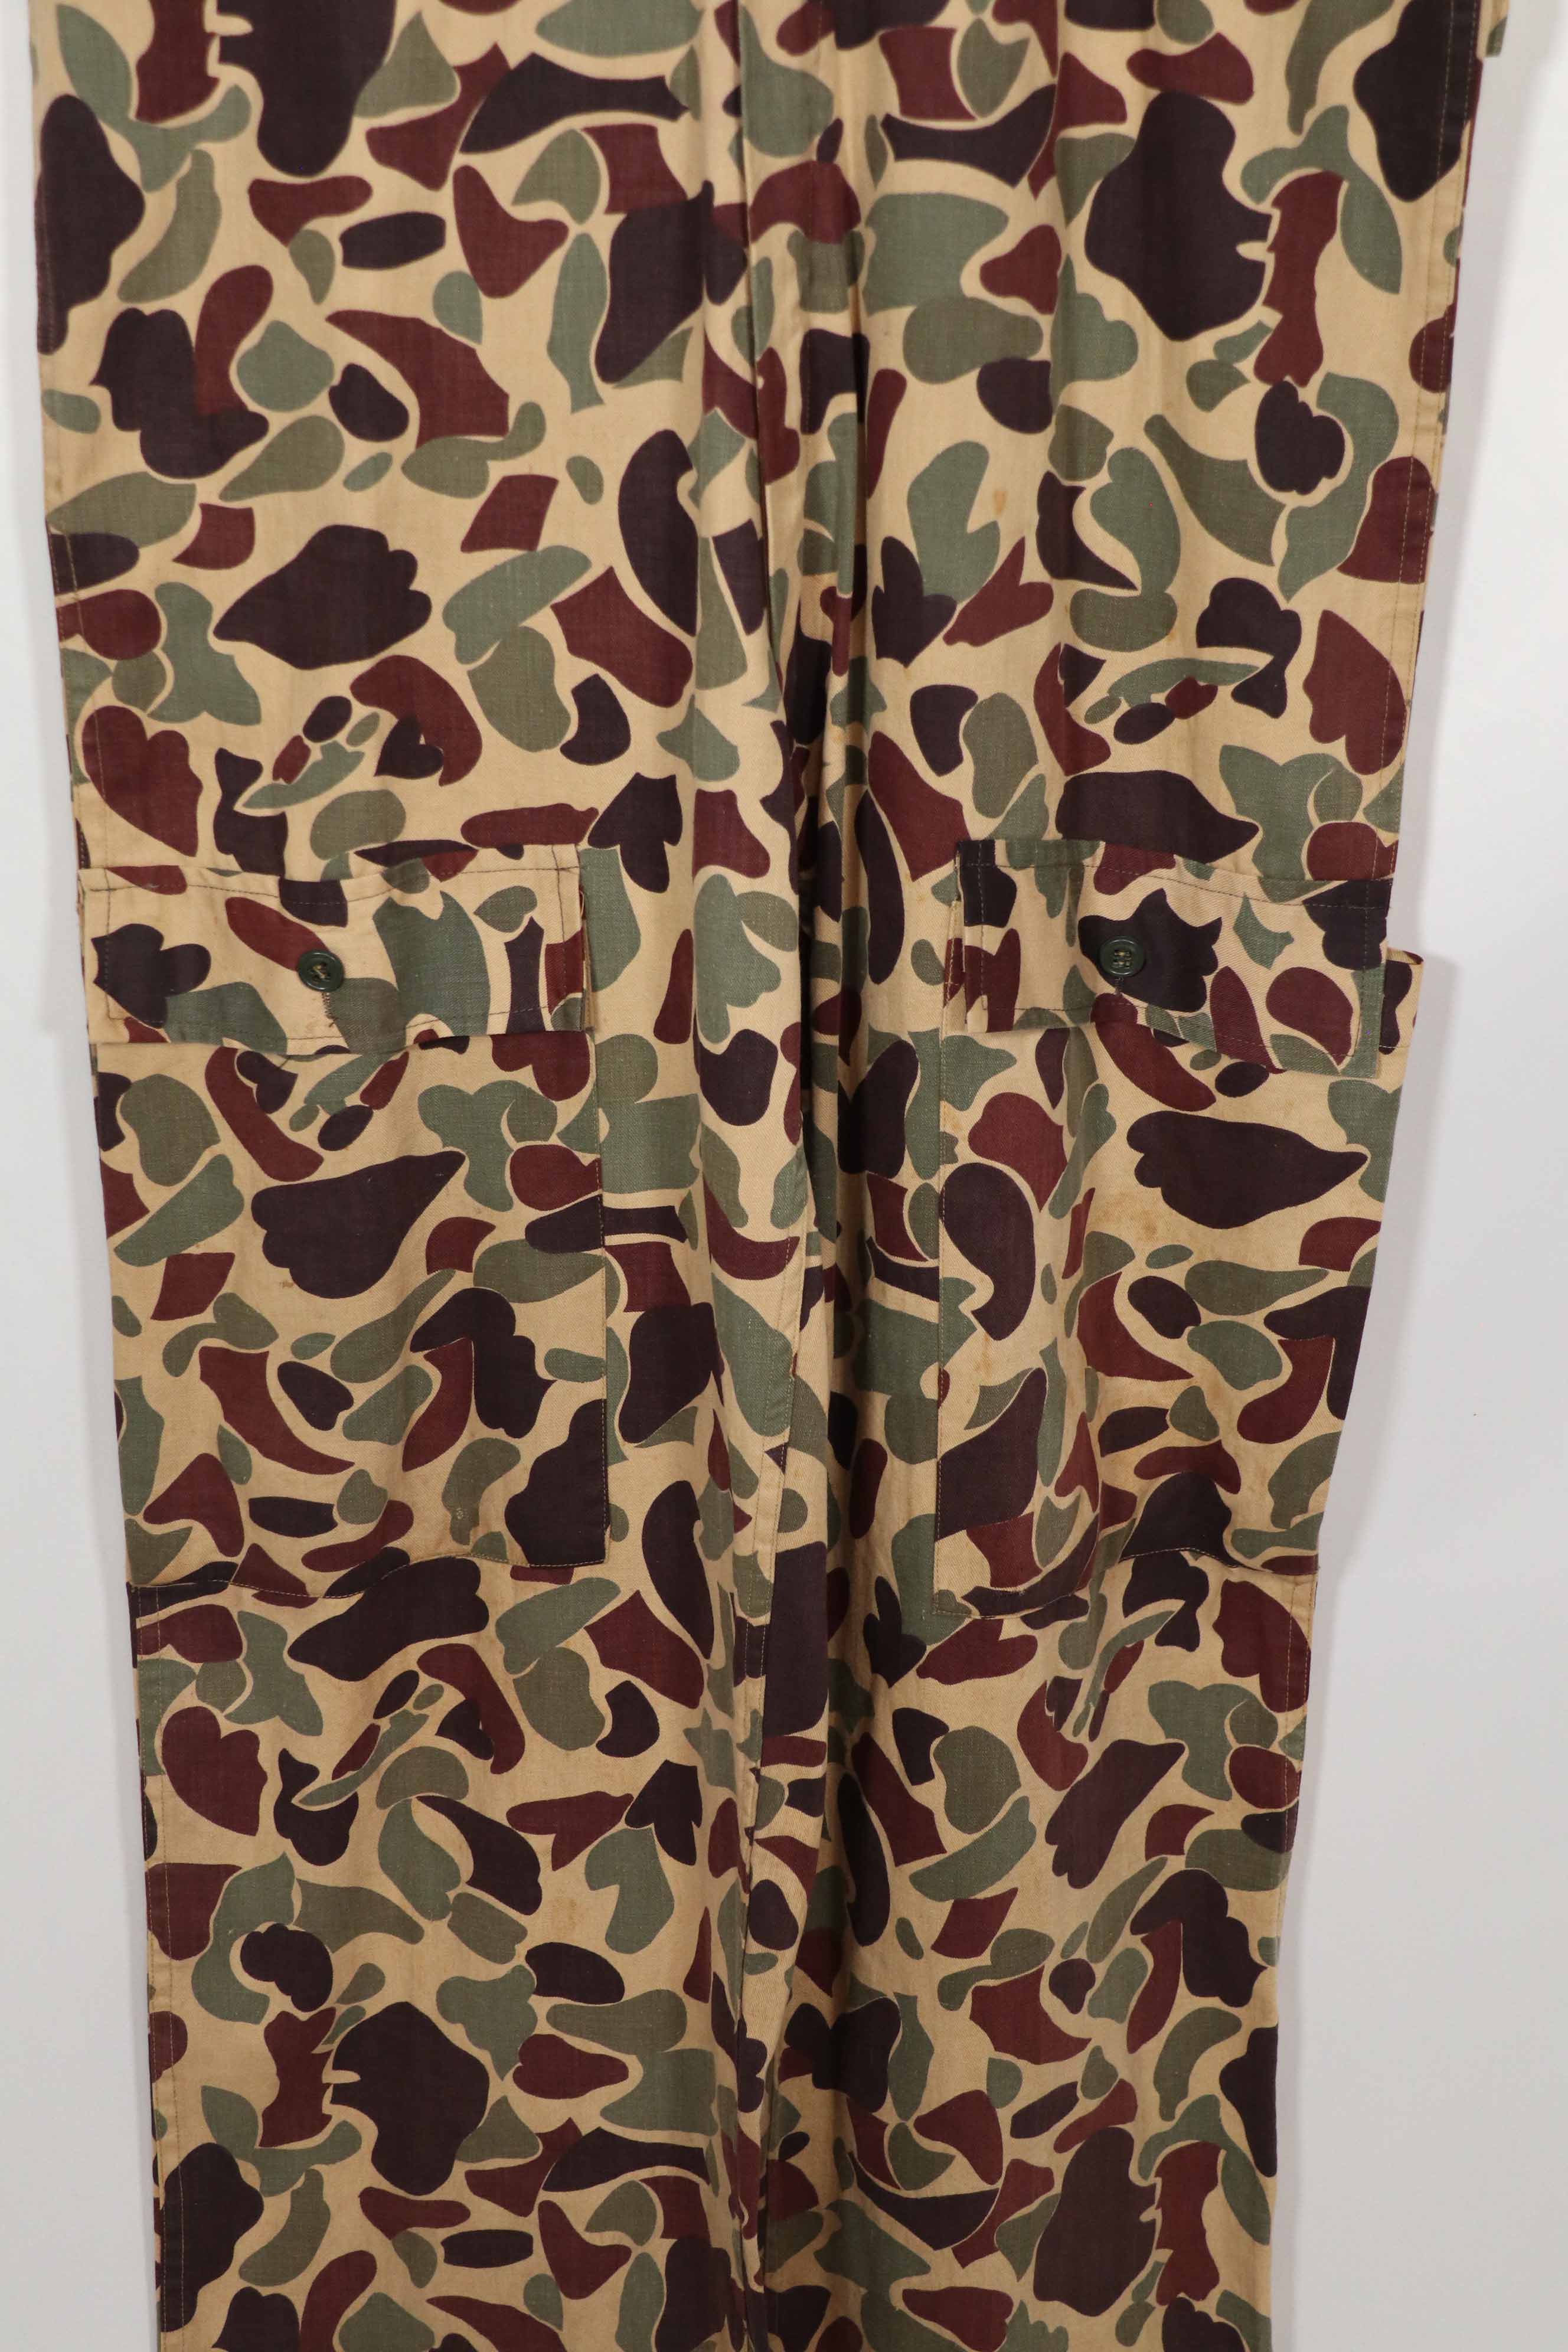 Real Japanese Beogum camouflage locally made duck hunter flight suit, almost unused.